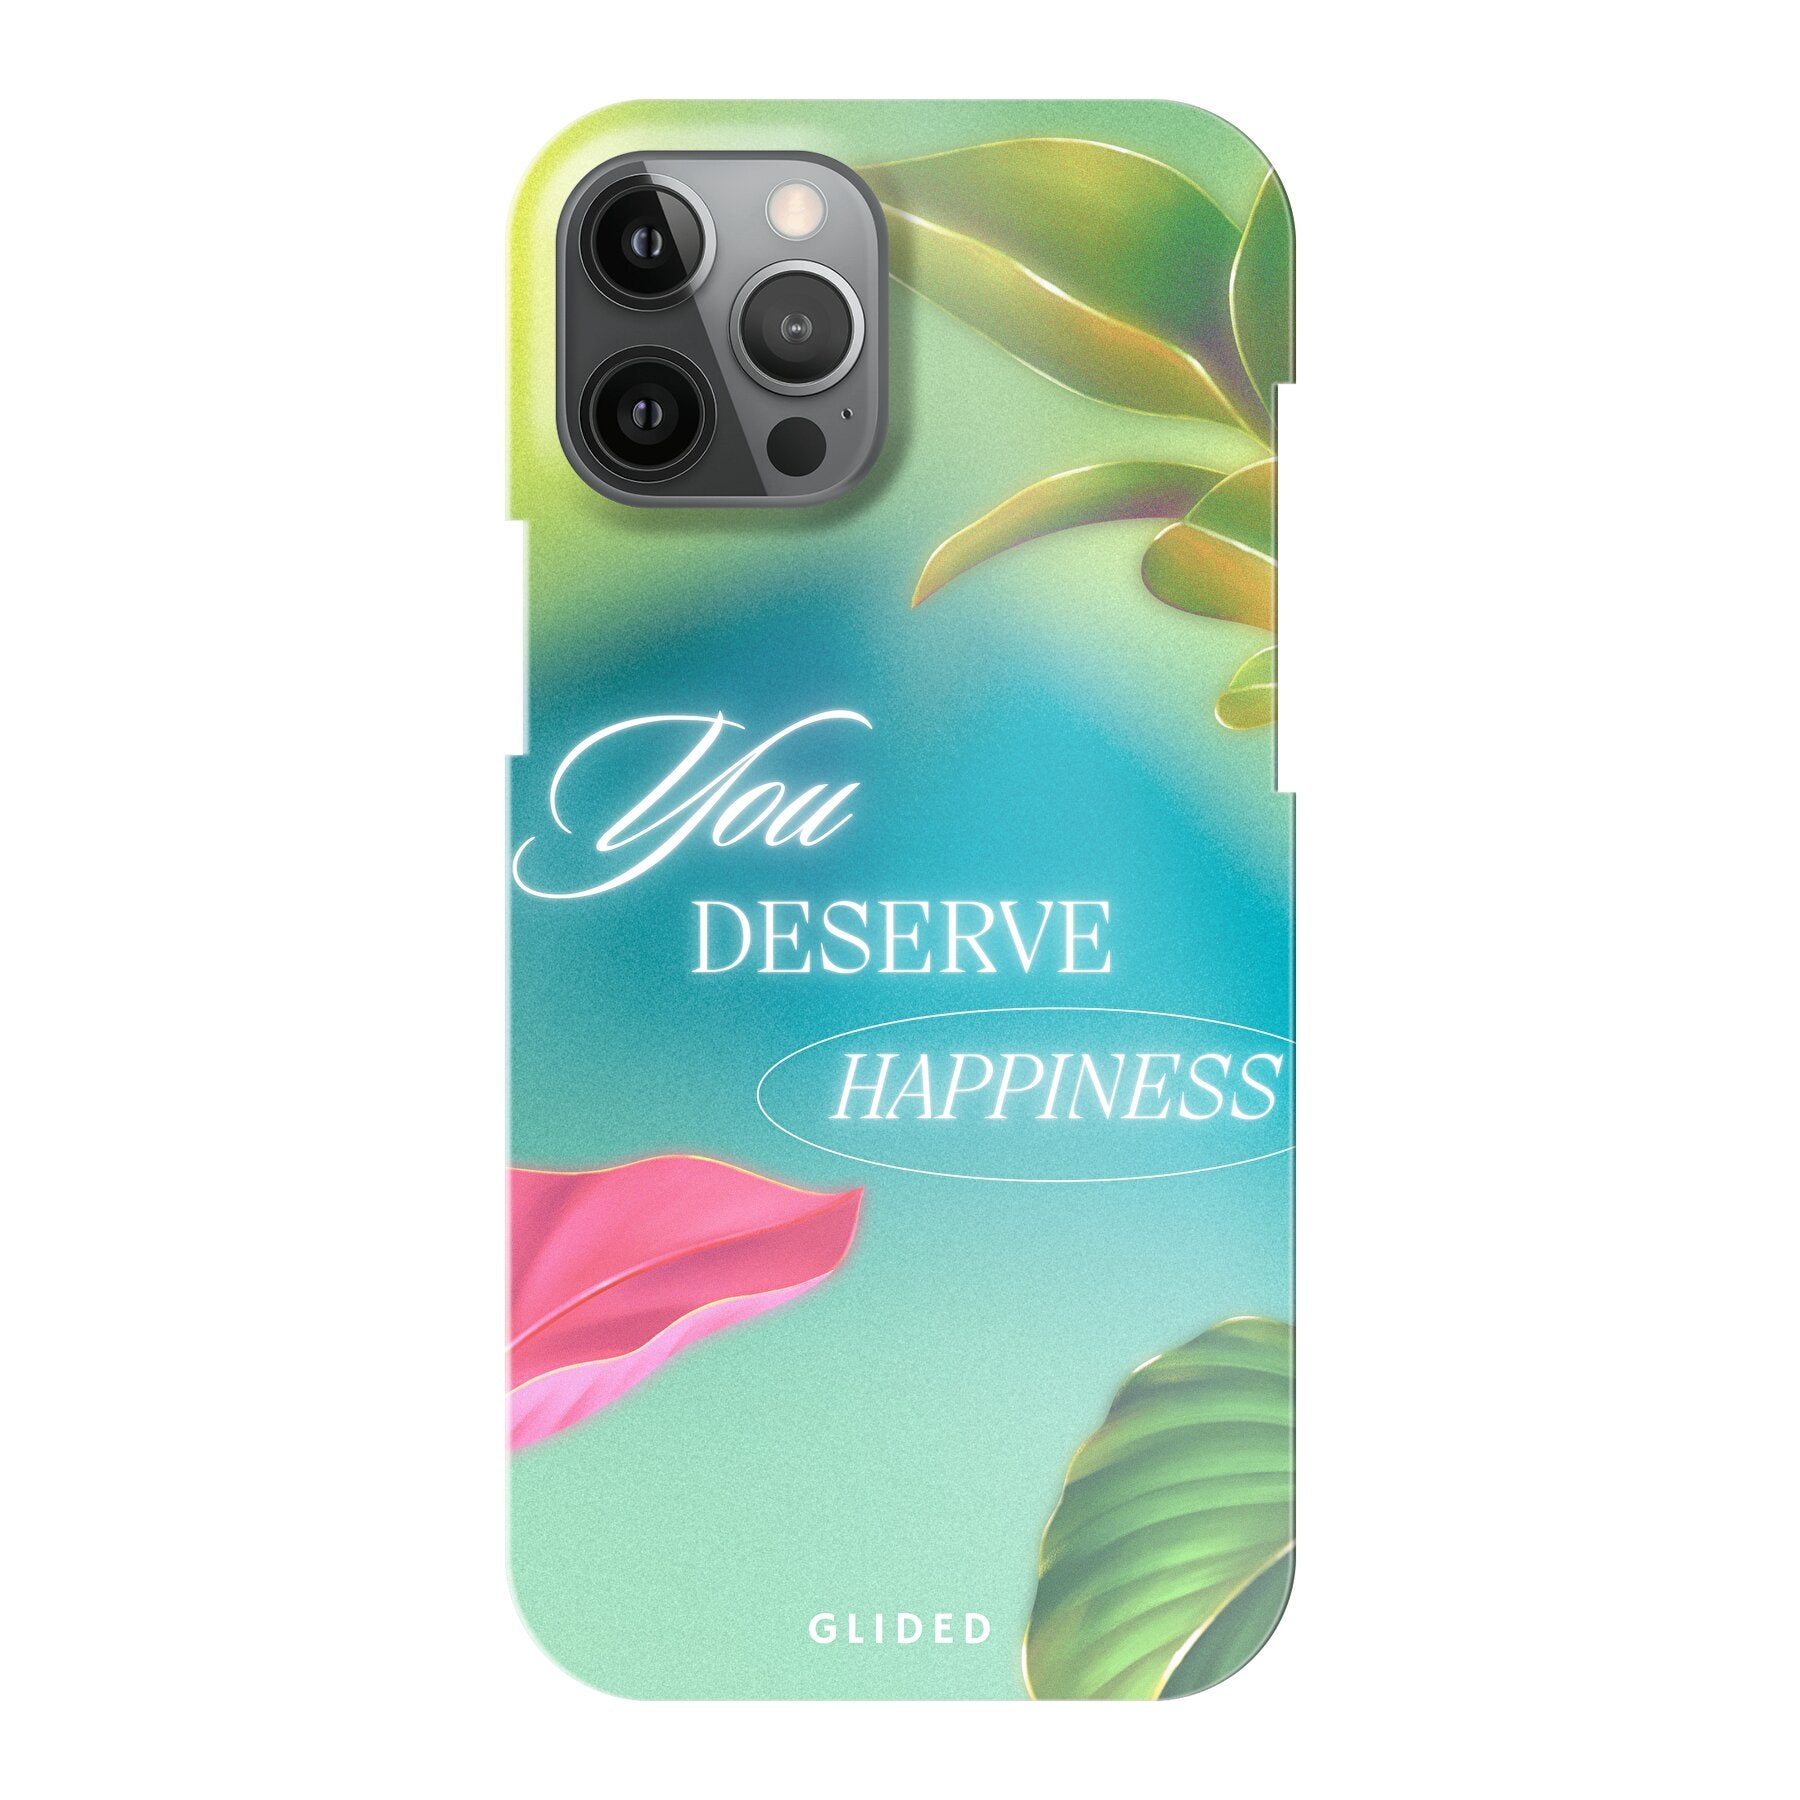 Happiness - iPhone 12 Pro Max - Hard Case